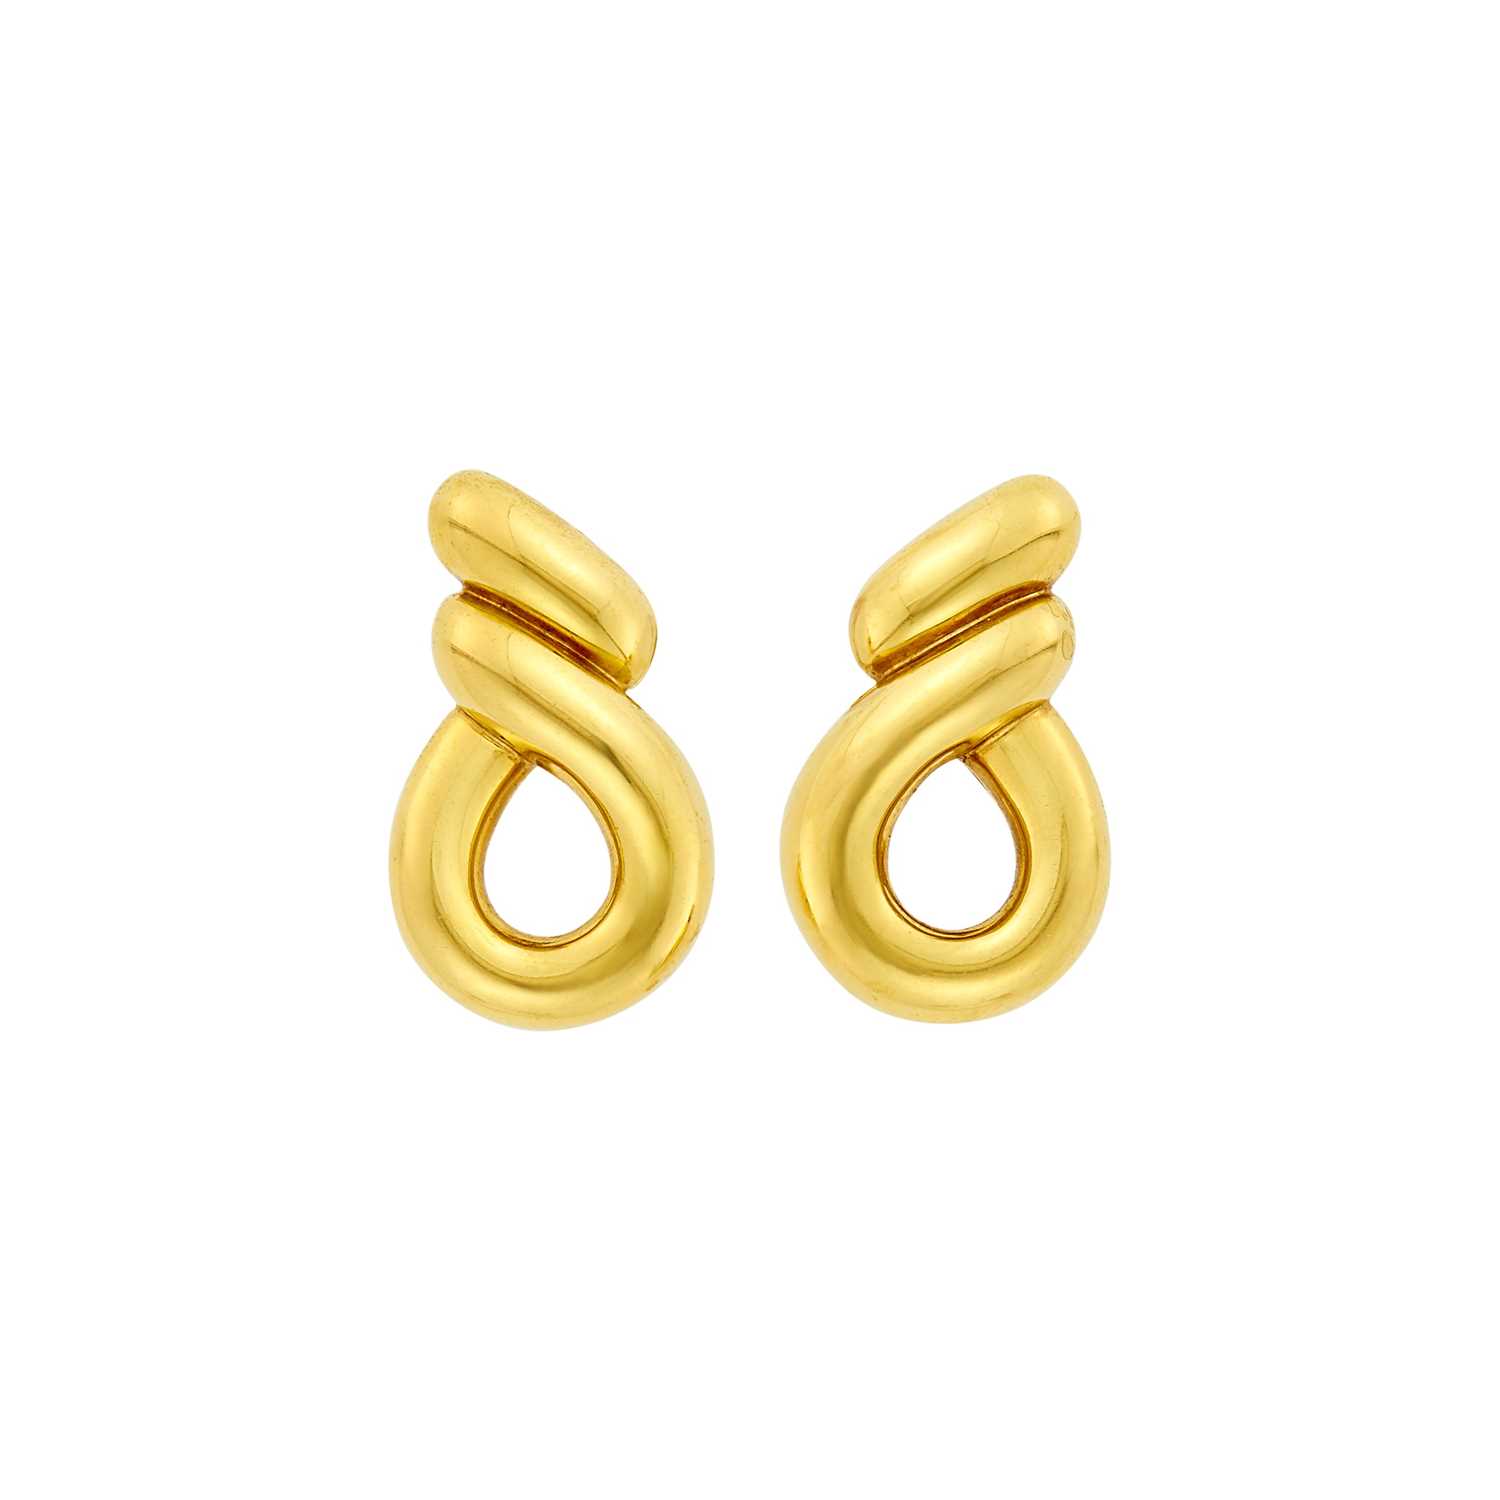 Lot 242 - Hermès Pair of Gold Earclips, France